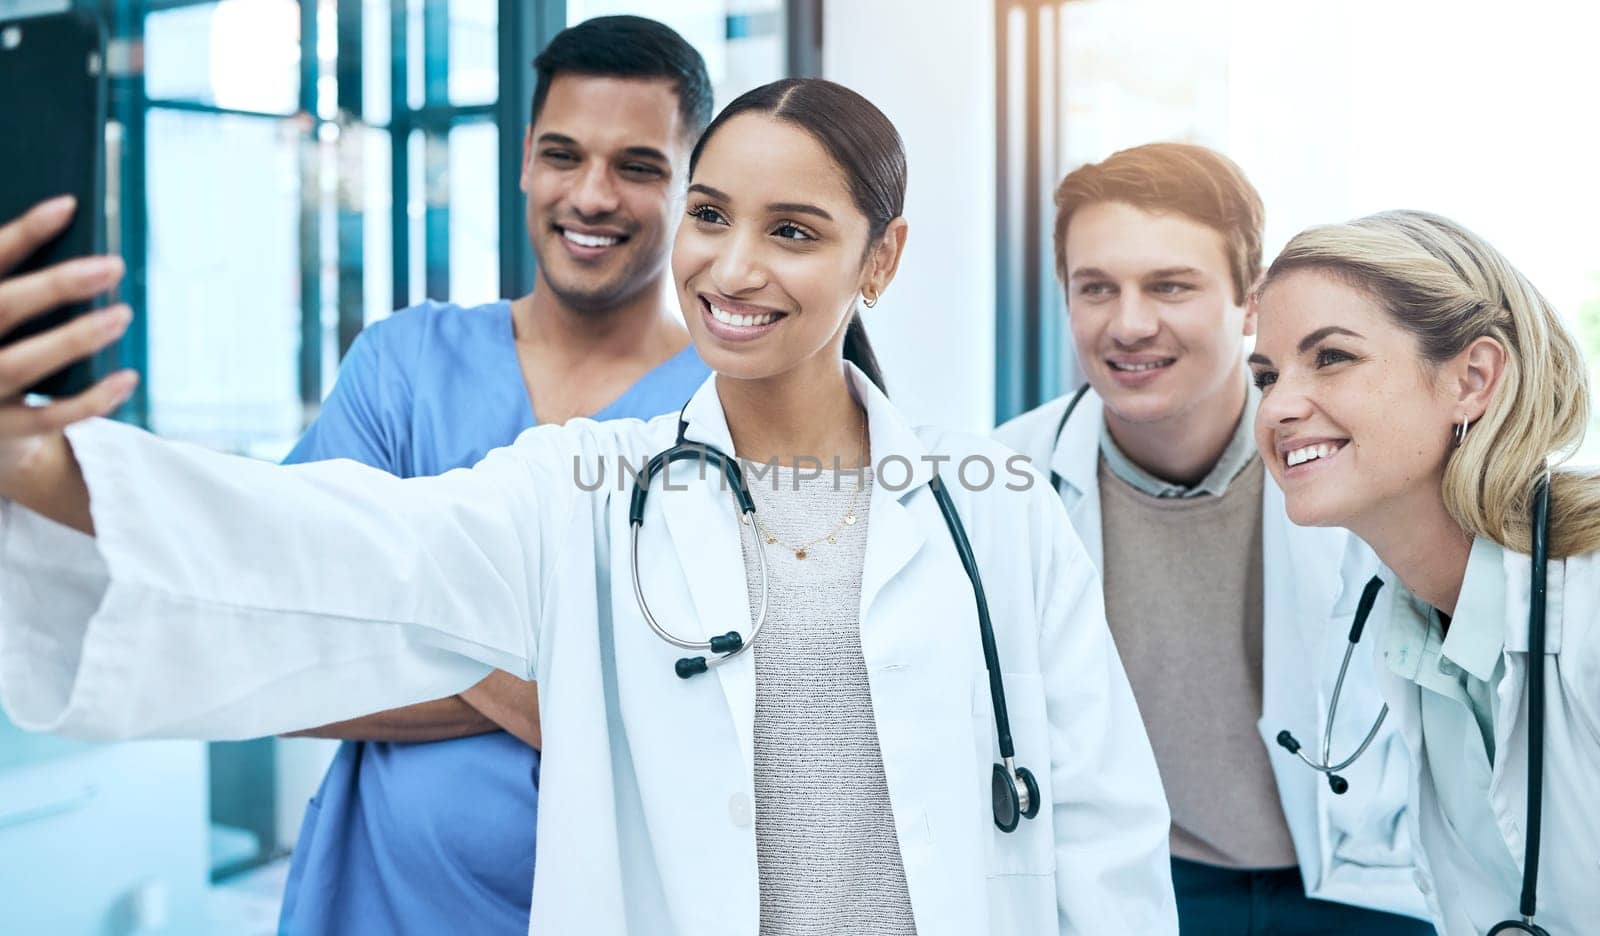 Selfie of nurses, doctors or medical group of people for social media, hospital or healthcare teamwork post. Happy, diversity and young women and men with internship profile picture or career memory by YuriArcurs